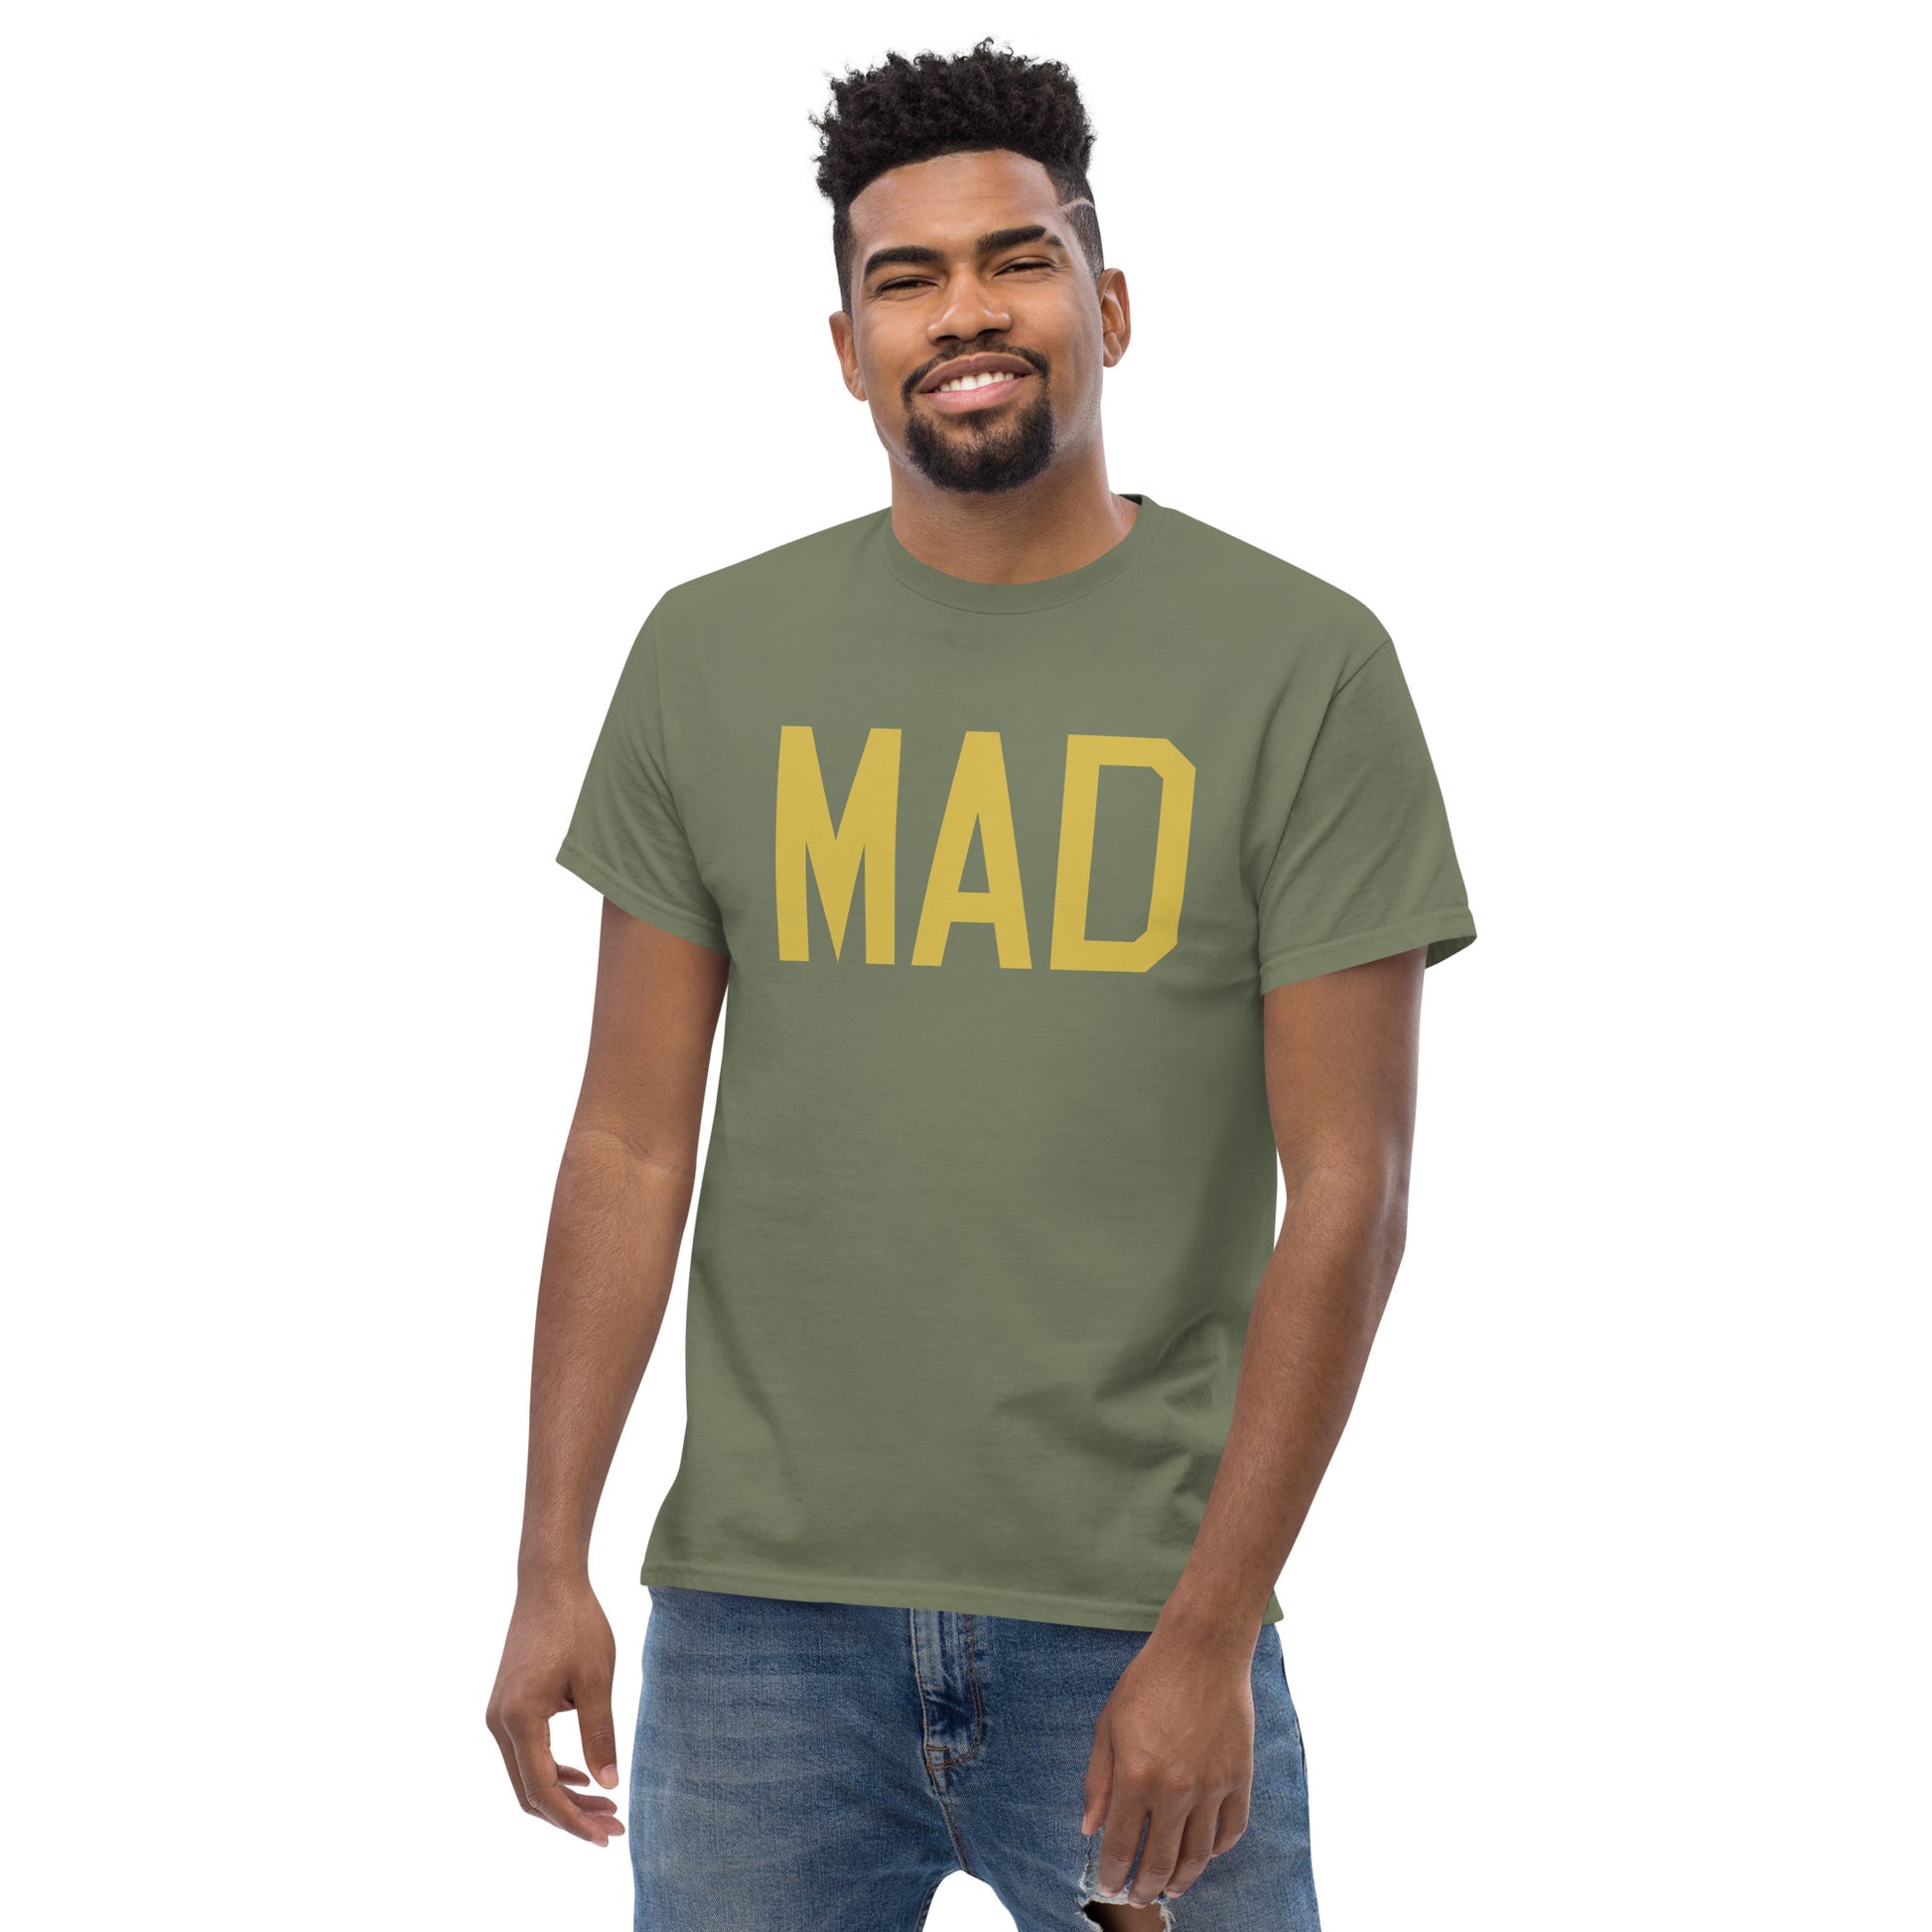 Aviation Enthusiast Men's Tee - Old Gold Graphic • MAD Madrid • YHM Designs - Image 06